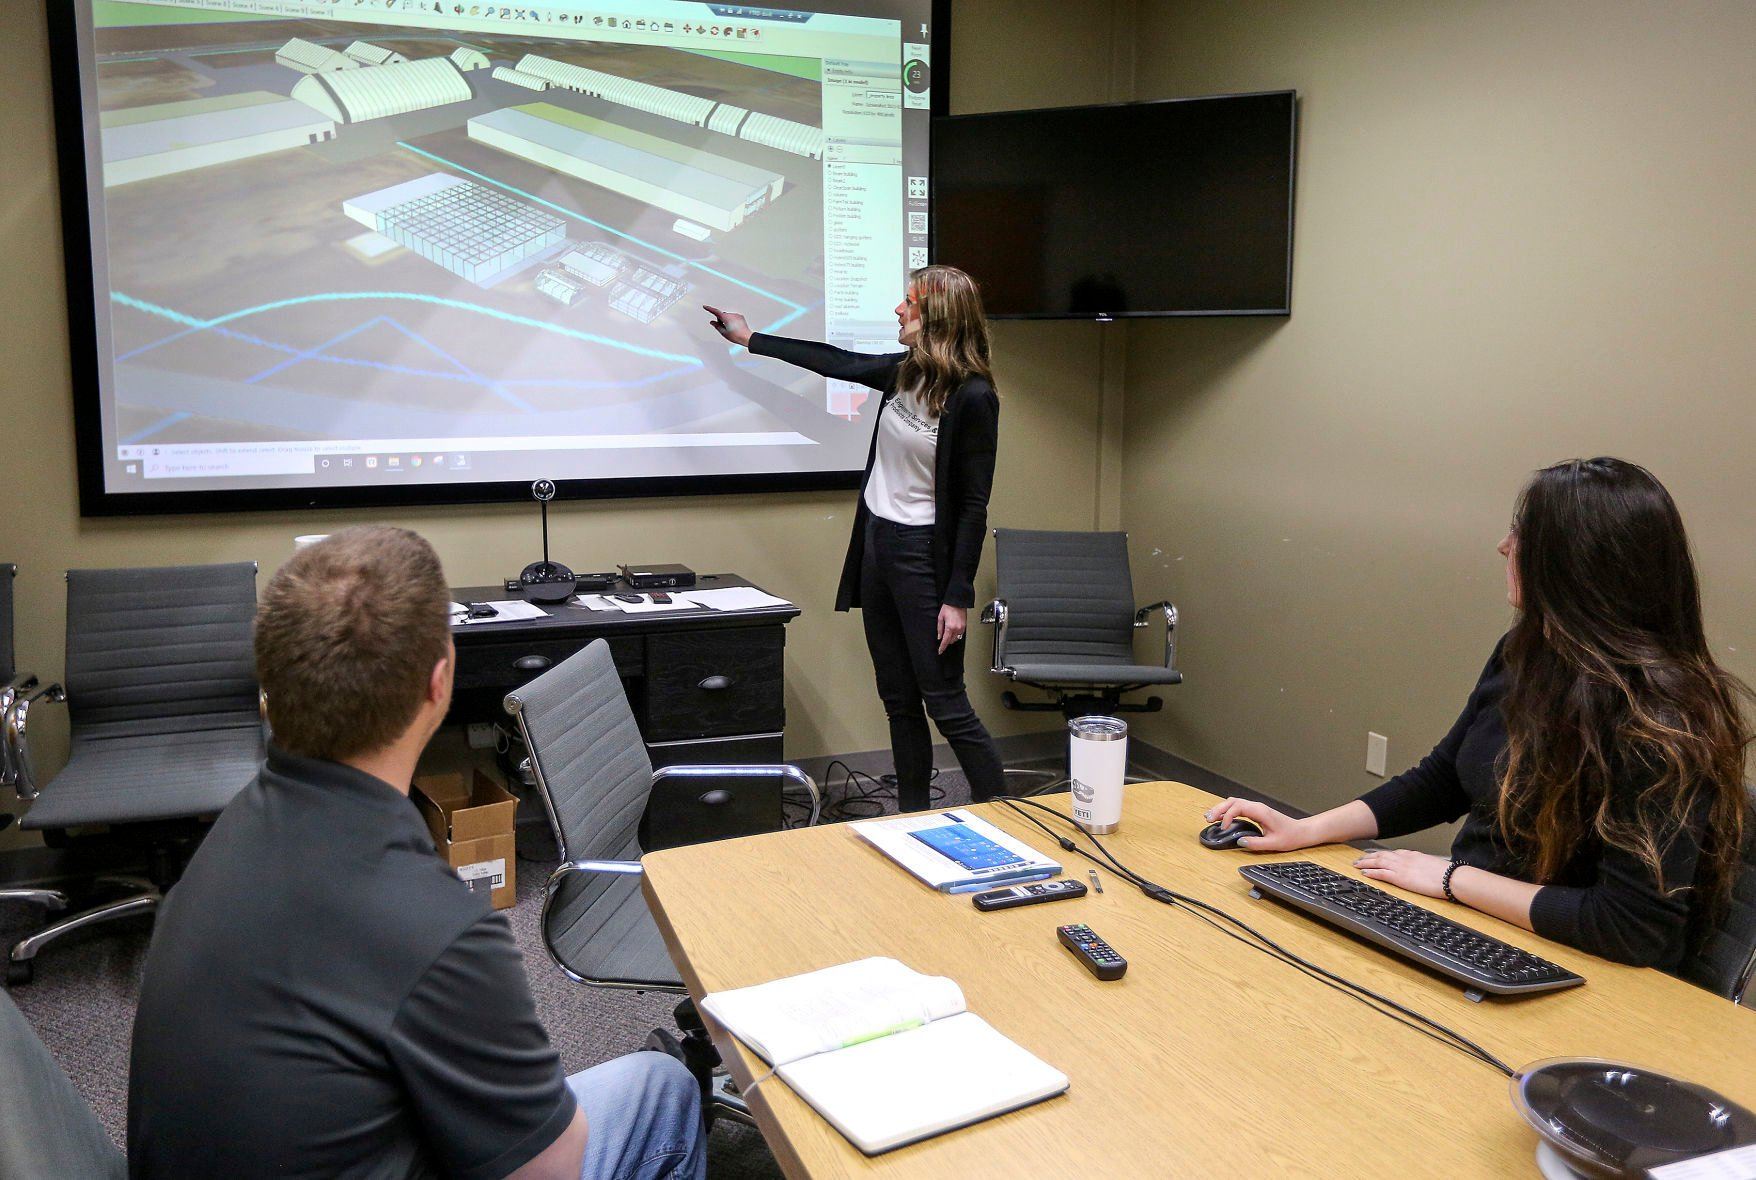 FarmTek General Manager Martina Bockenstedt (center) speaks with team members John Schemmel (left) and Danielle Will on Monday in Dyersville, Iowa. The company is planning a major expansion.    PHOTO CREDIT: Dave Kettering